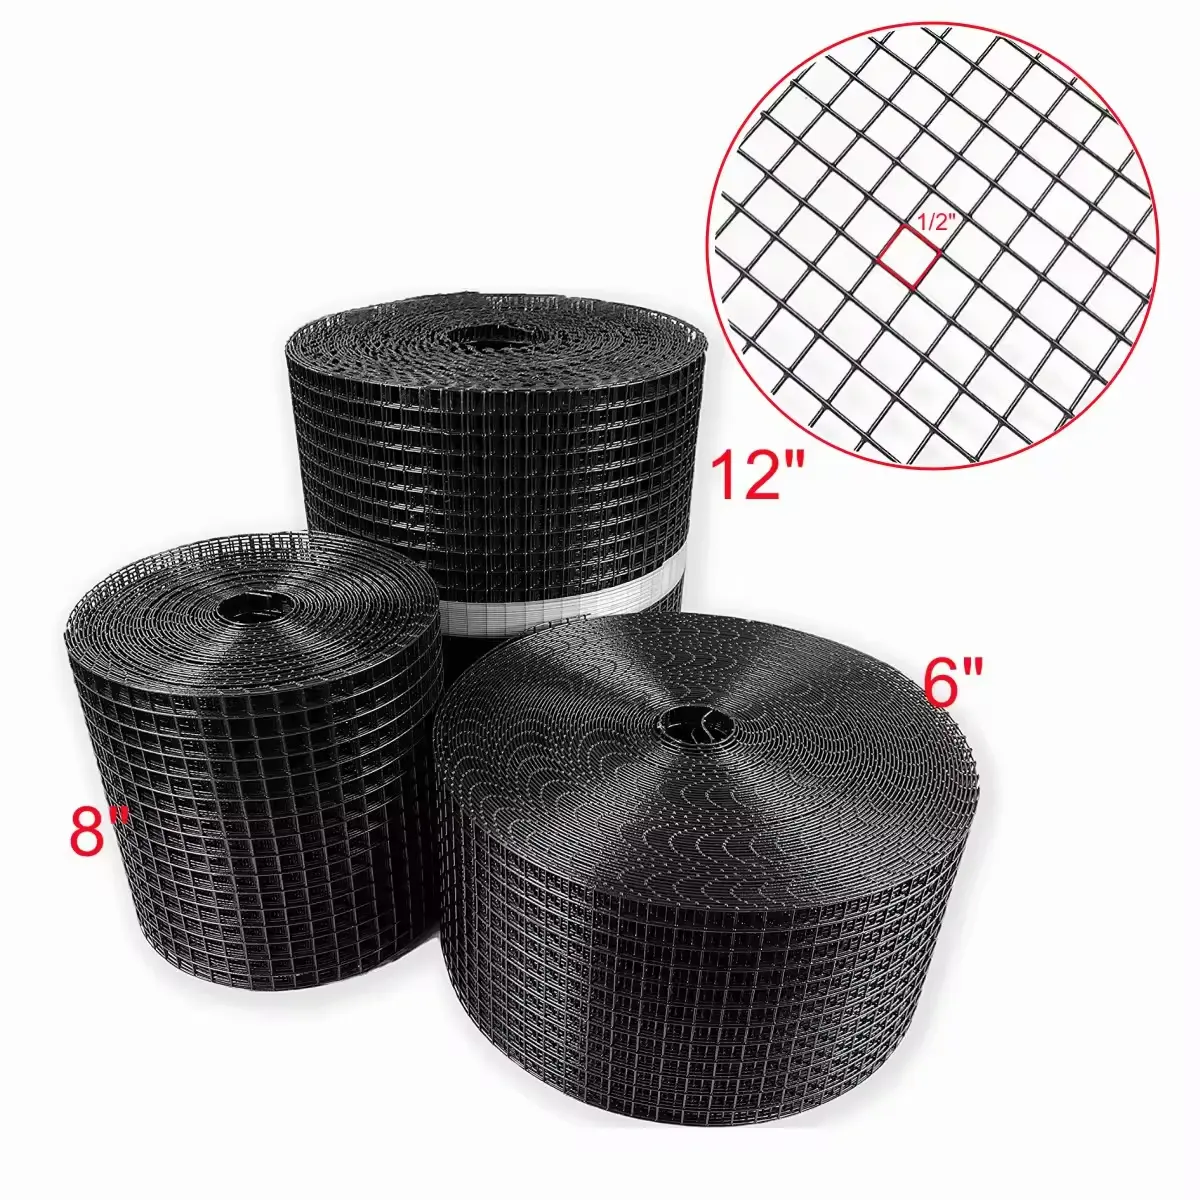 Zengda 6"30m Kit wIth 100 Aluminum Round Fasteners For Stop Pigeons Nesting Under Solar Panels